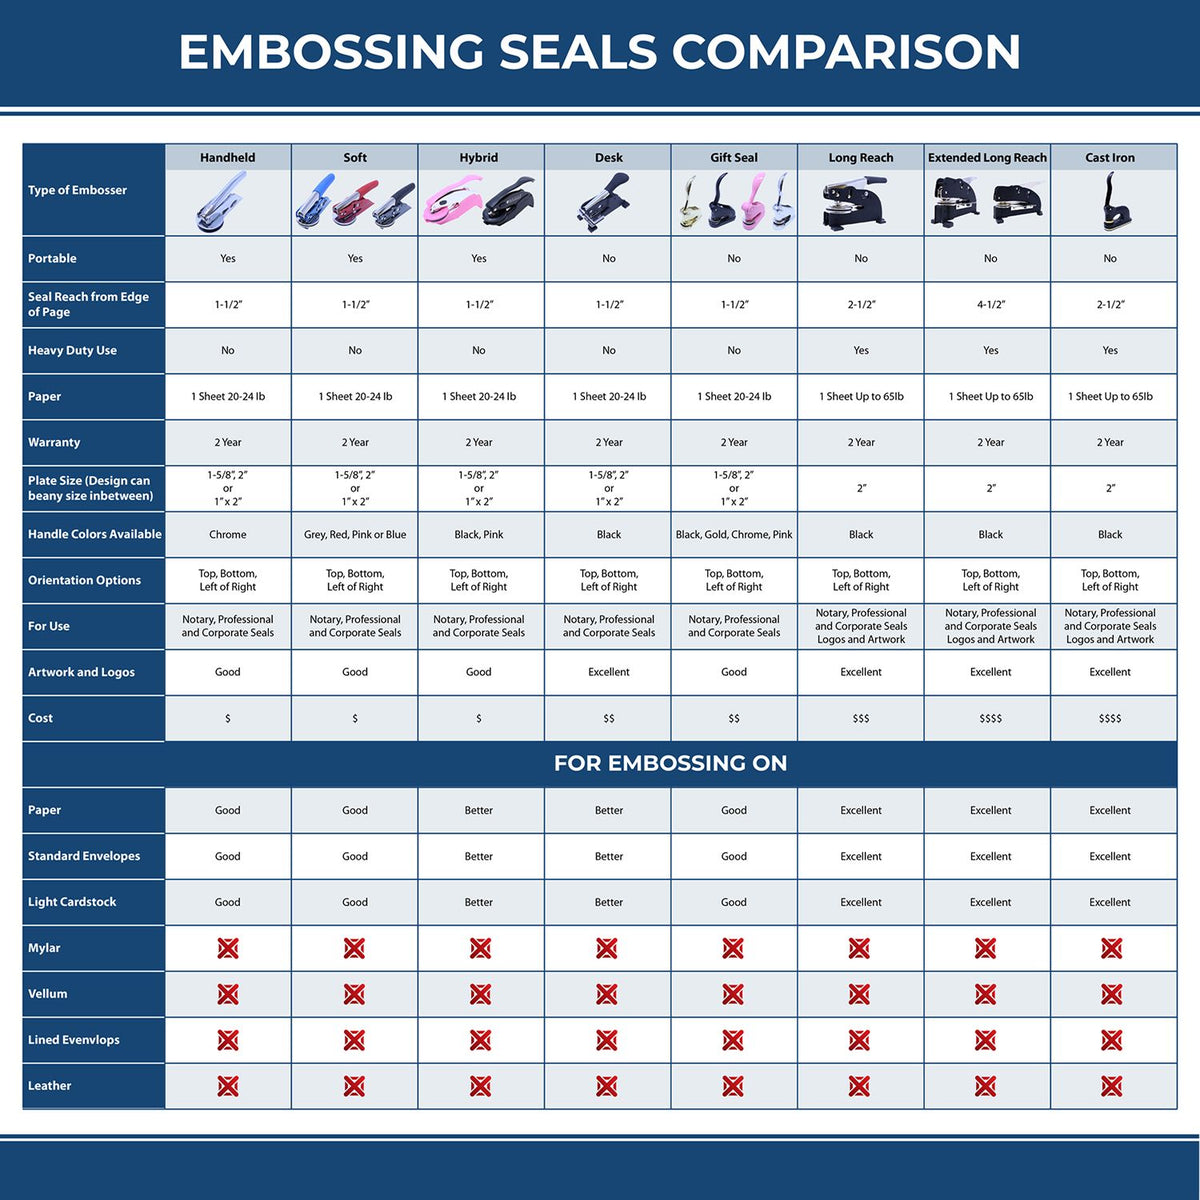 A comparison chart for the different types of mount models available for the Hybrid Michigan Geologist Seal